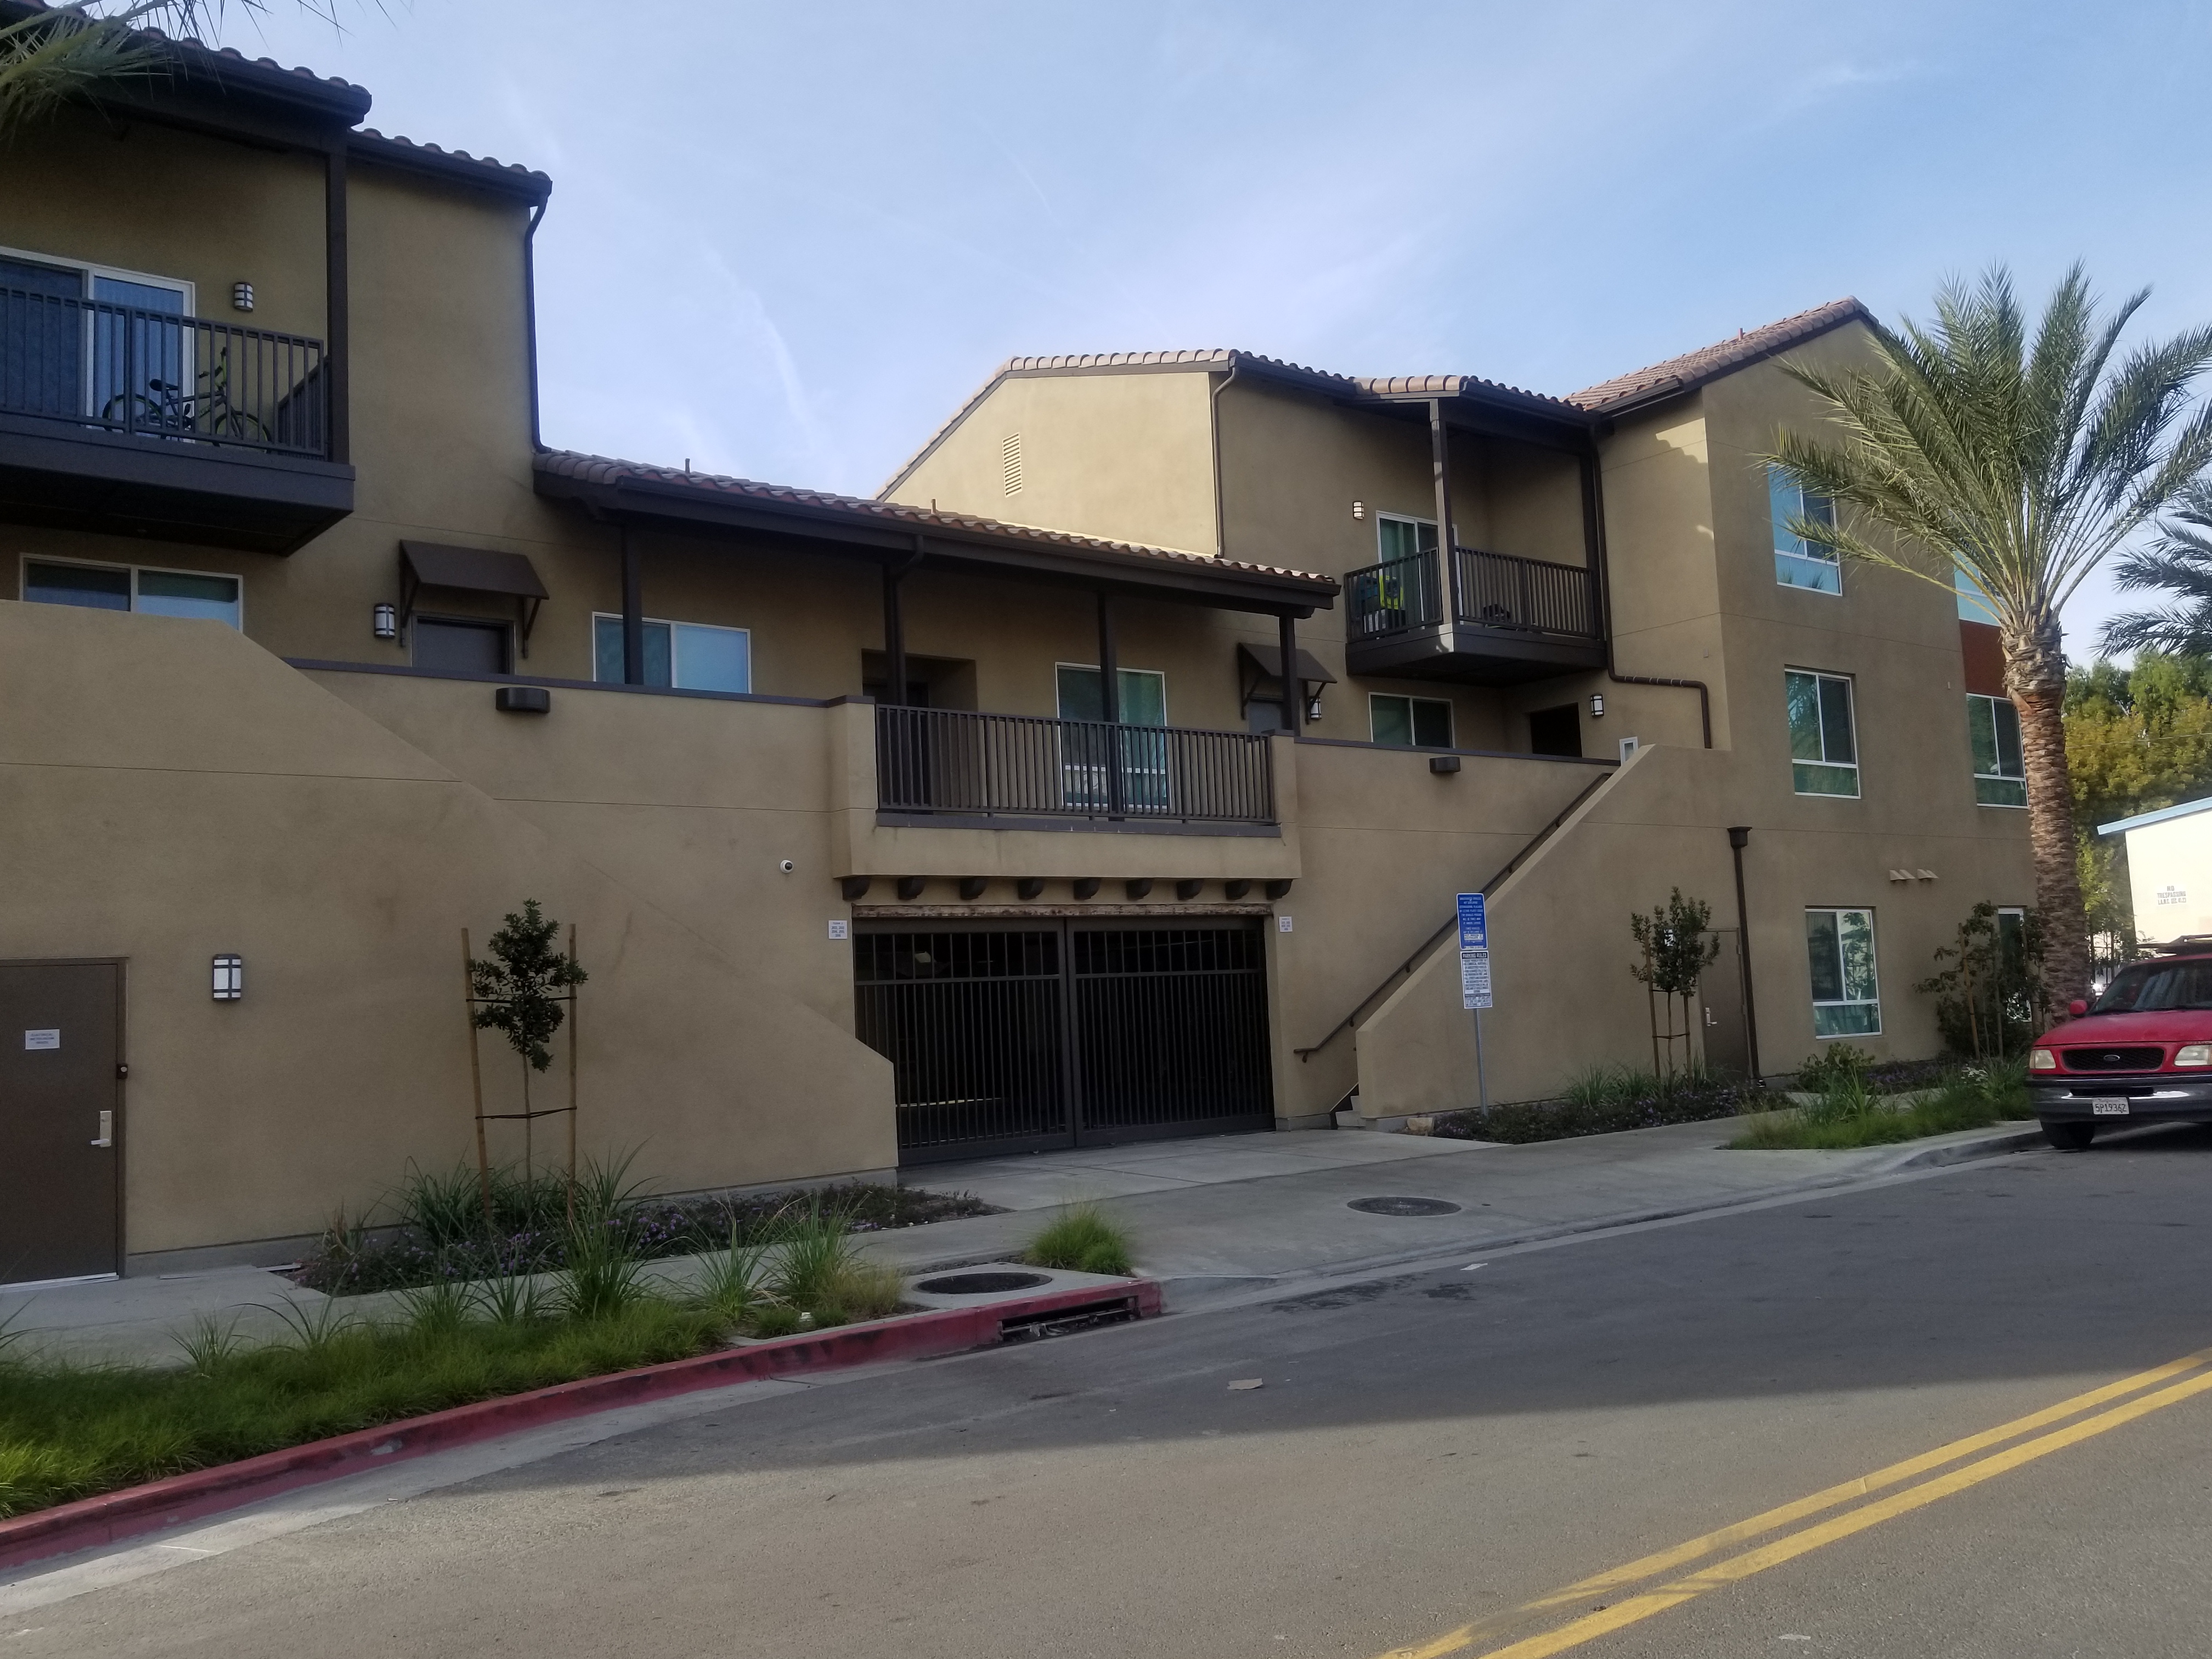 Different view of the outside of a three story light brown building. Ground floor has a gated parking lot entrance. There are newly planted trees, plants and a palm tree in front of the building. There are two staircases across from one another that lead to the sidewalk.